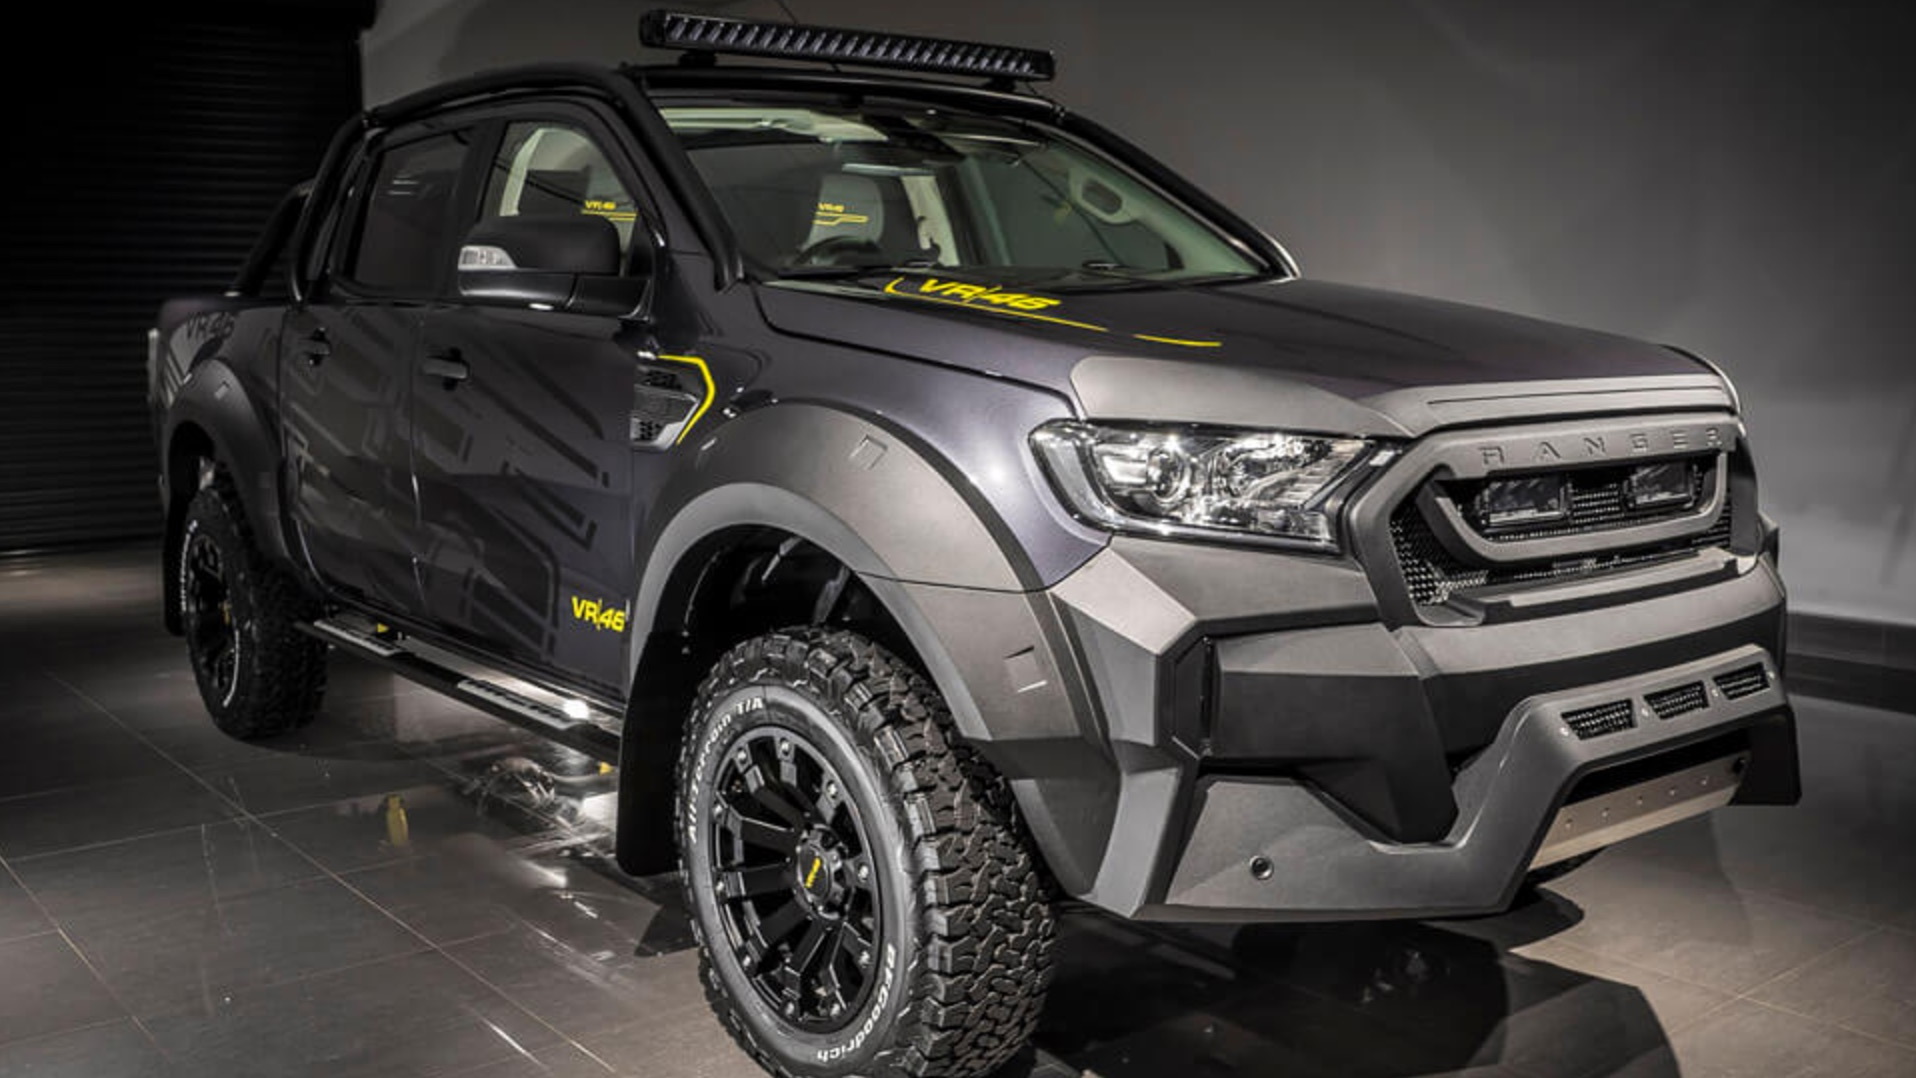 Valentino Rossi-approved Ford VR46 Ranger